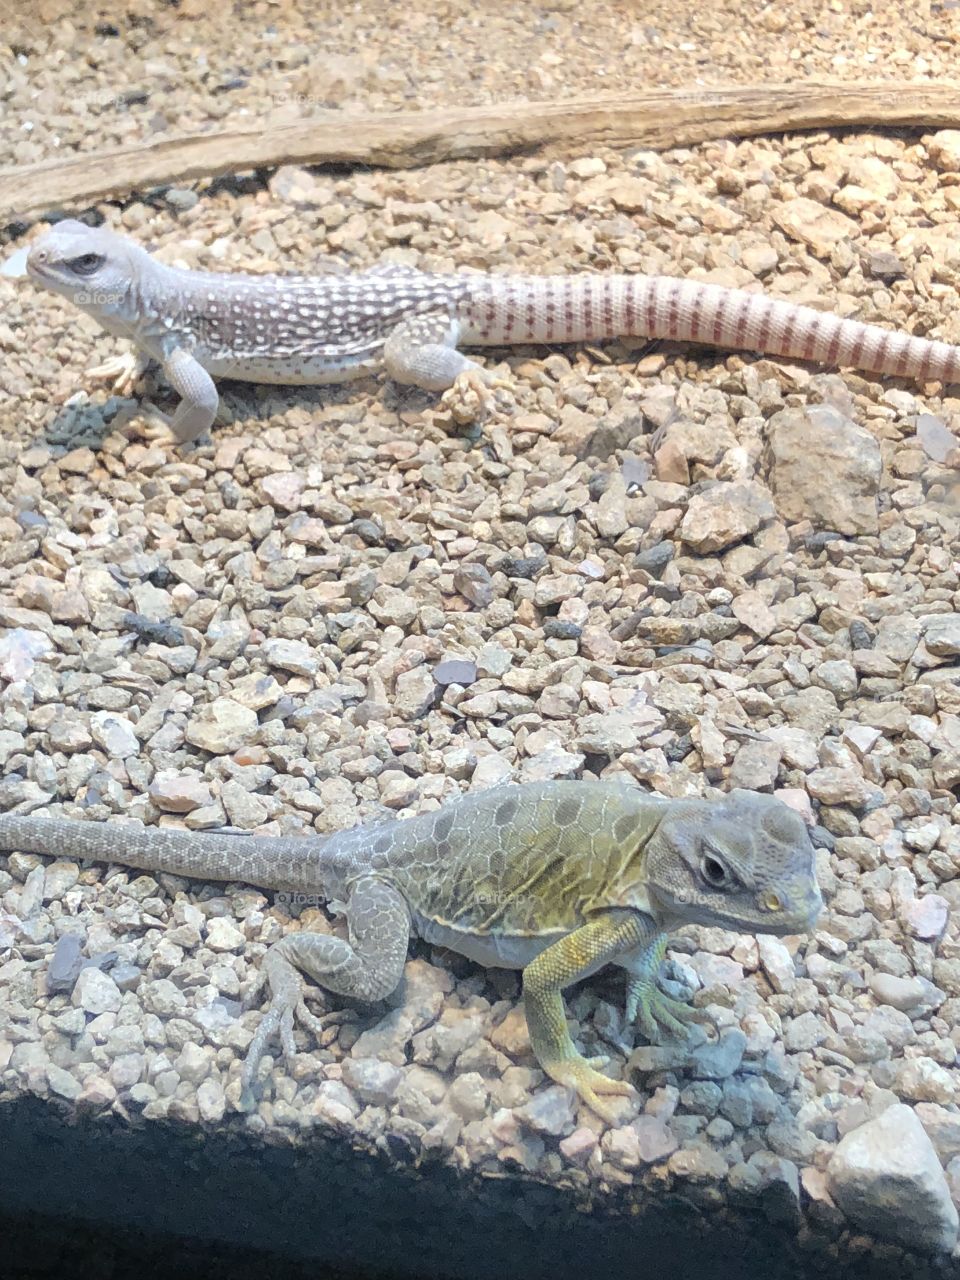 Lizards at the zoo